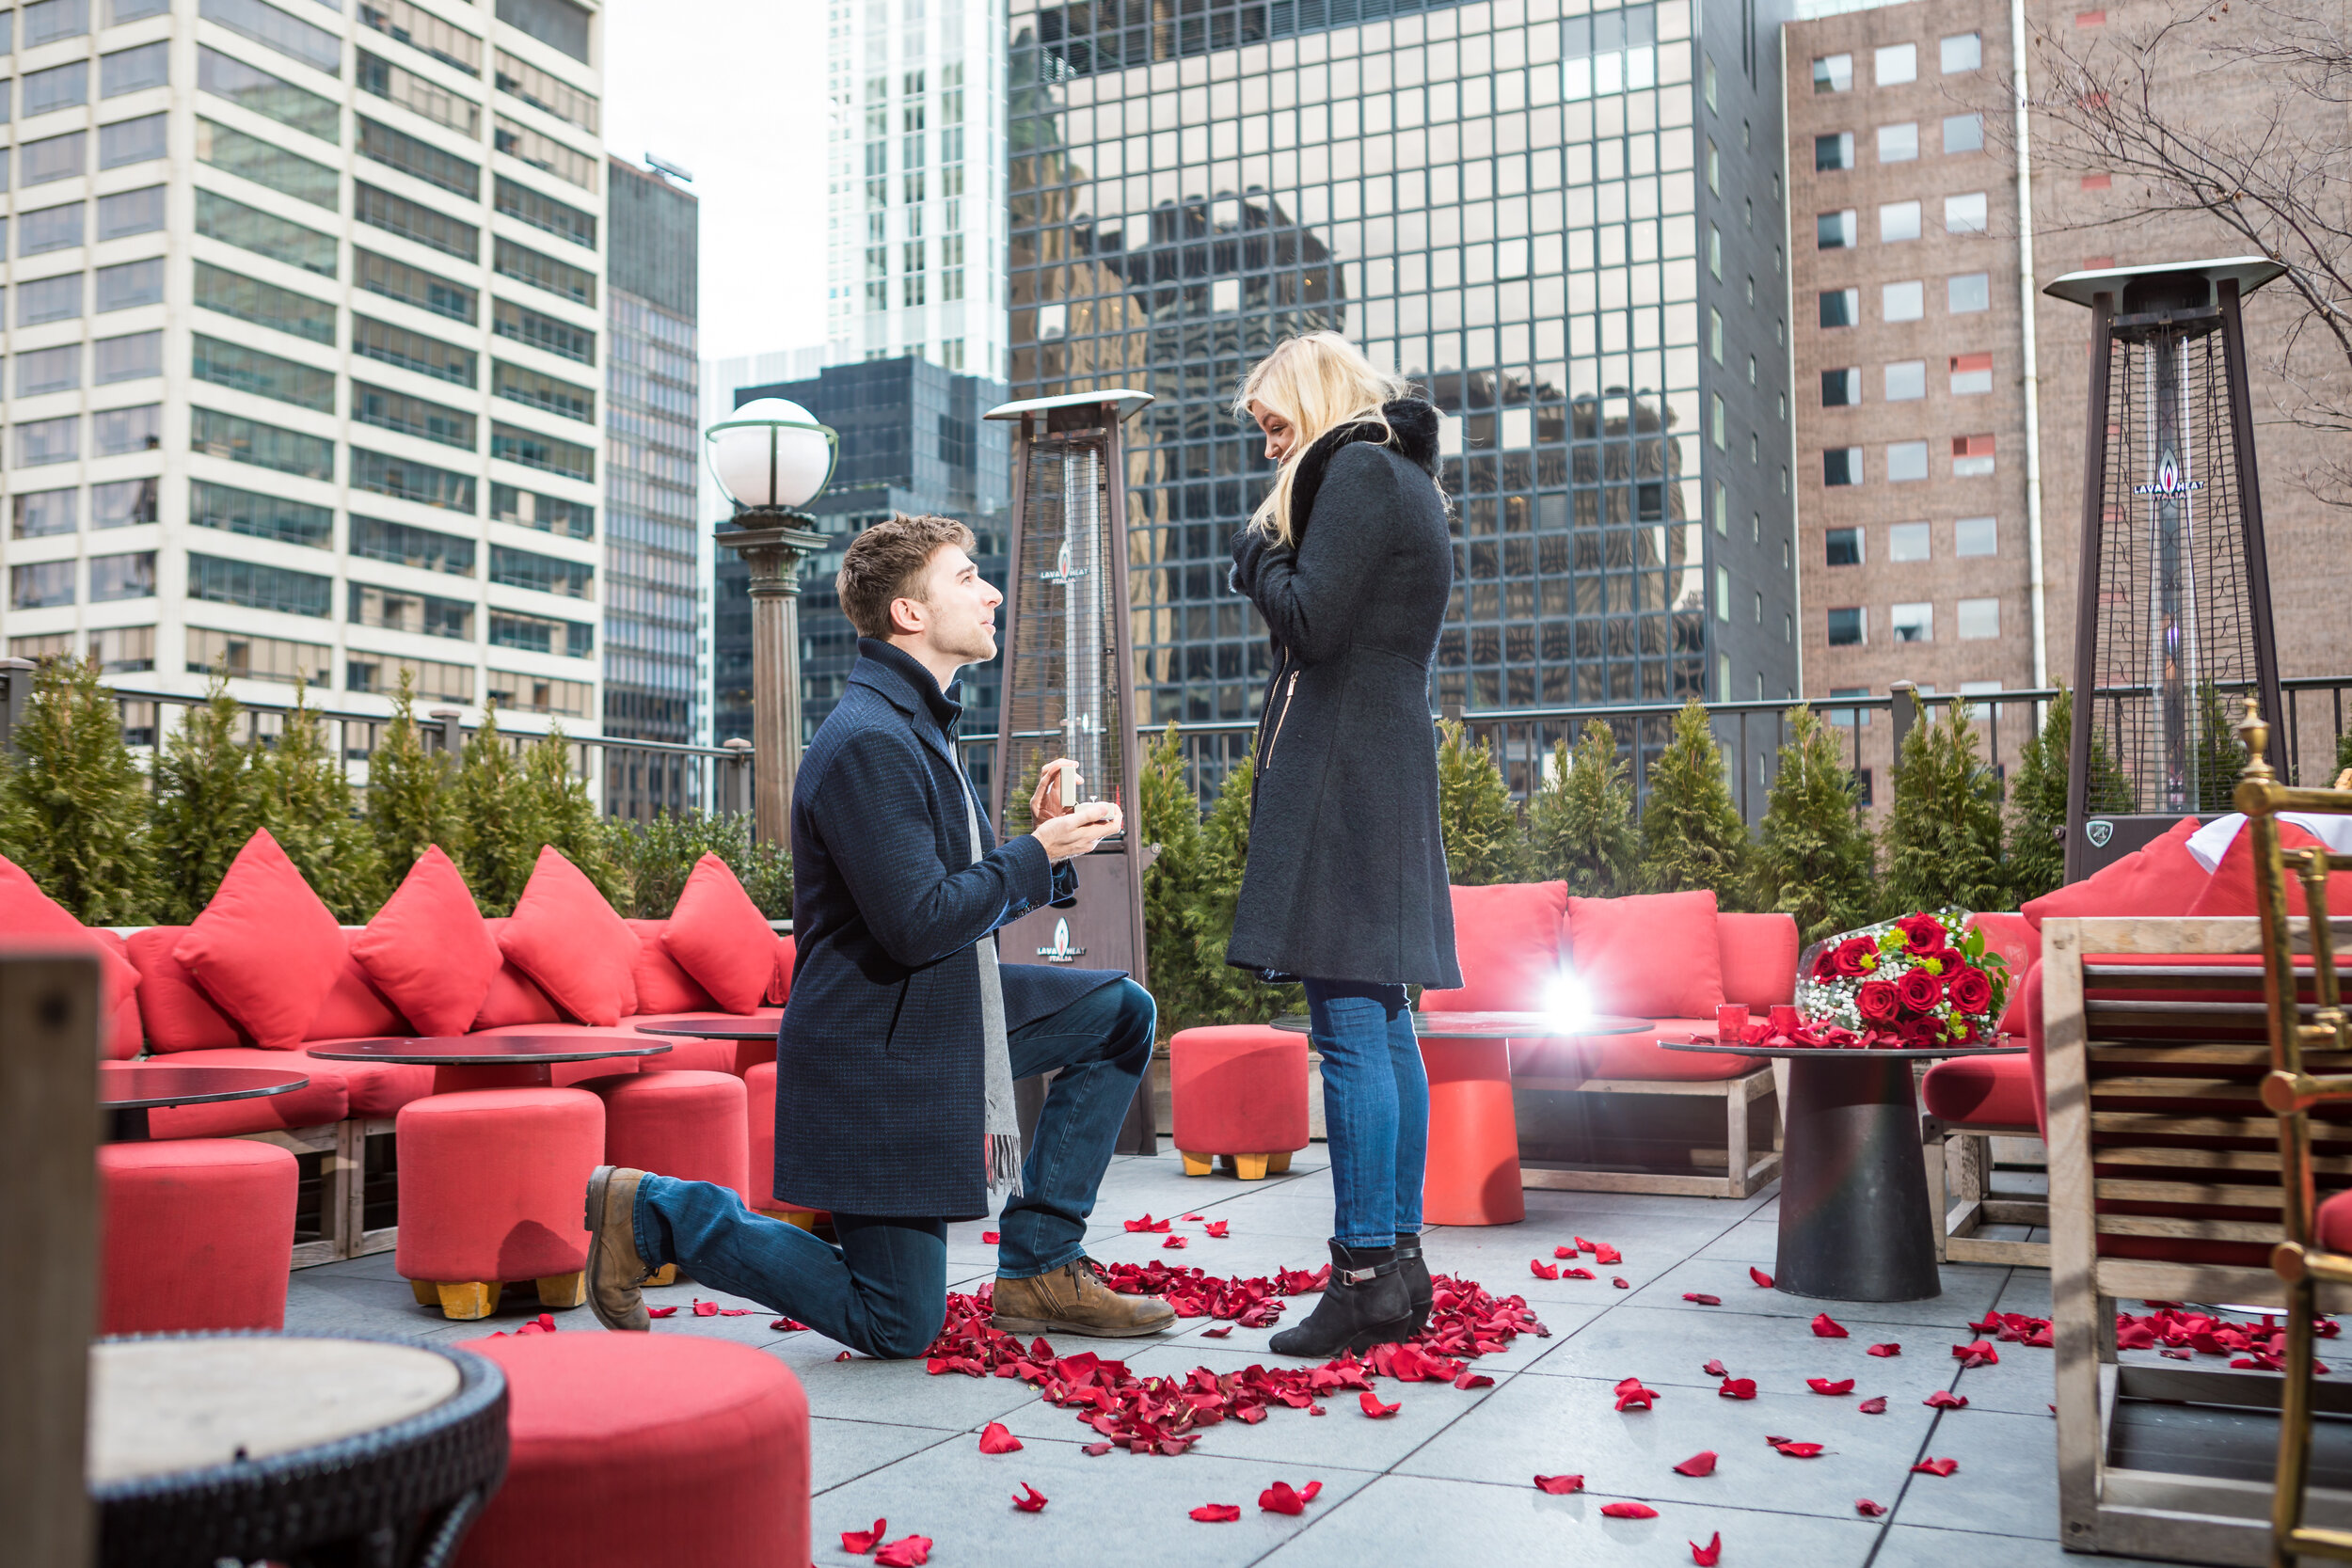 NYC Rooftop Surprise Proposal